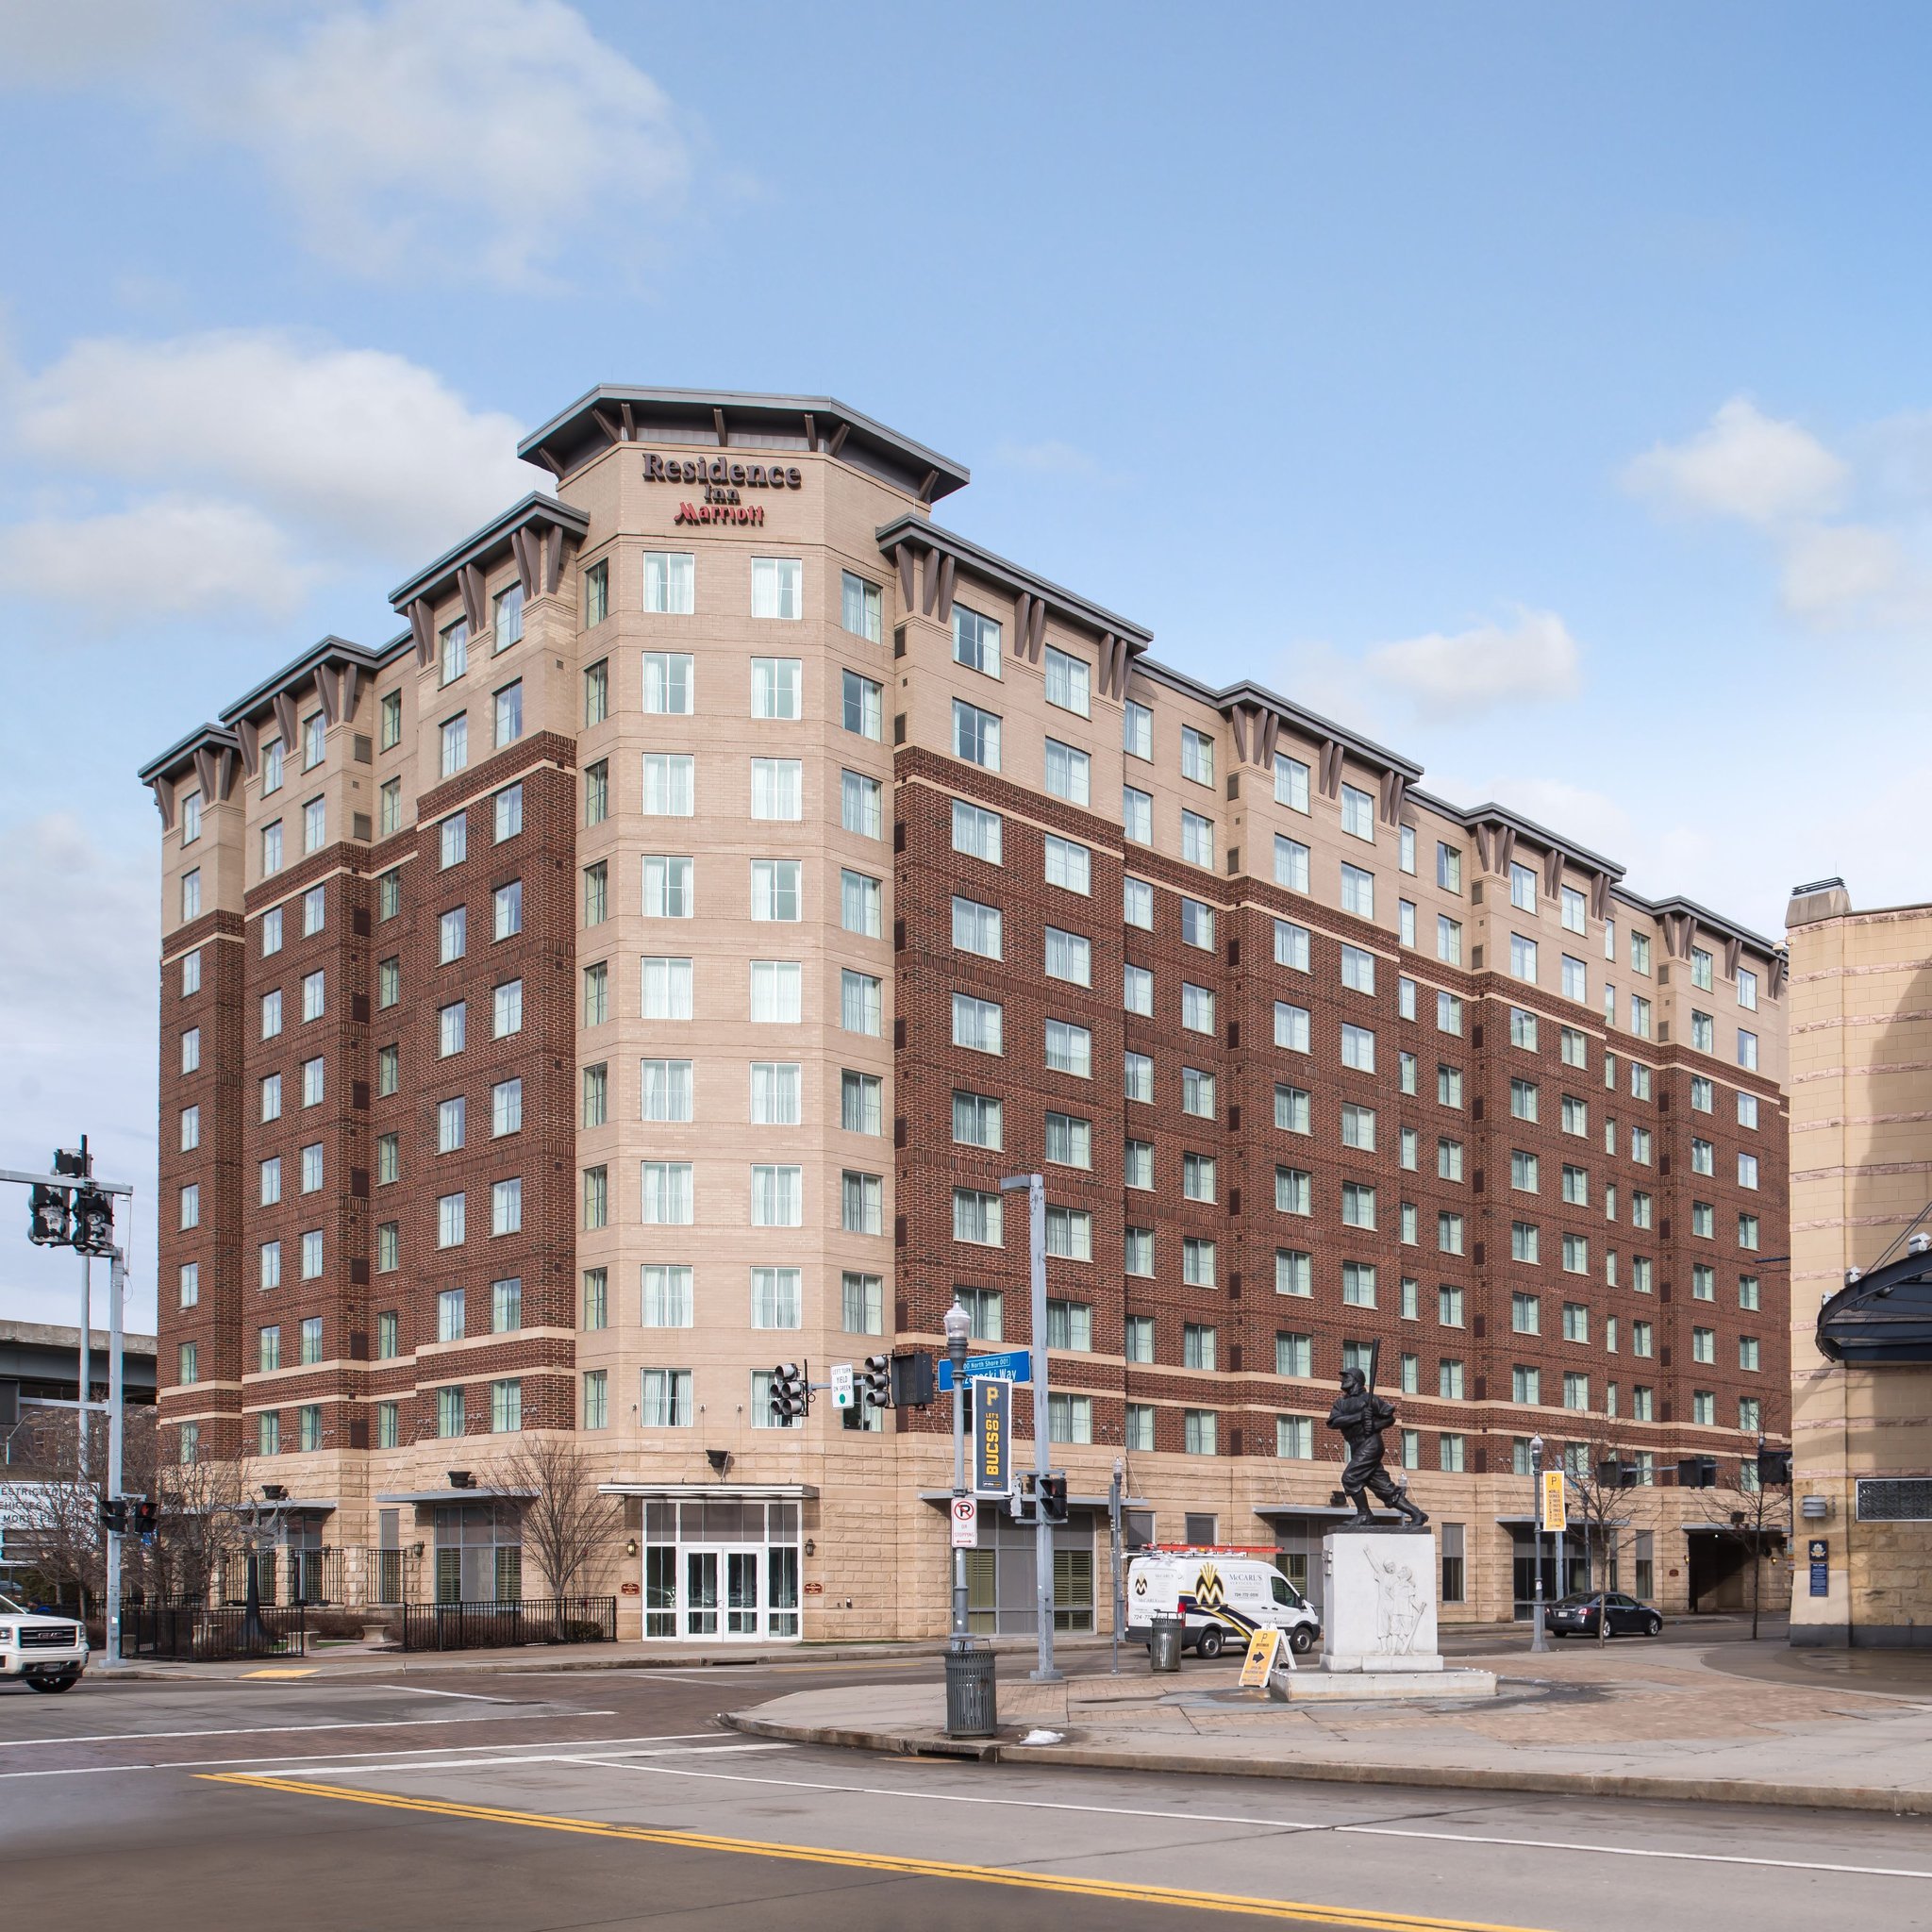 Residence Inn Pittsburgh North Shore- Pittsburgh, PA Hotels- First